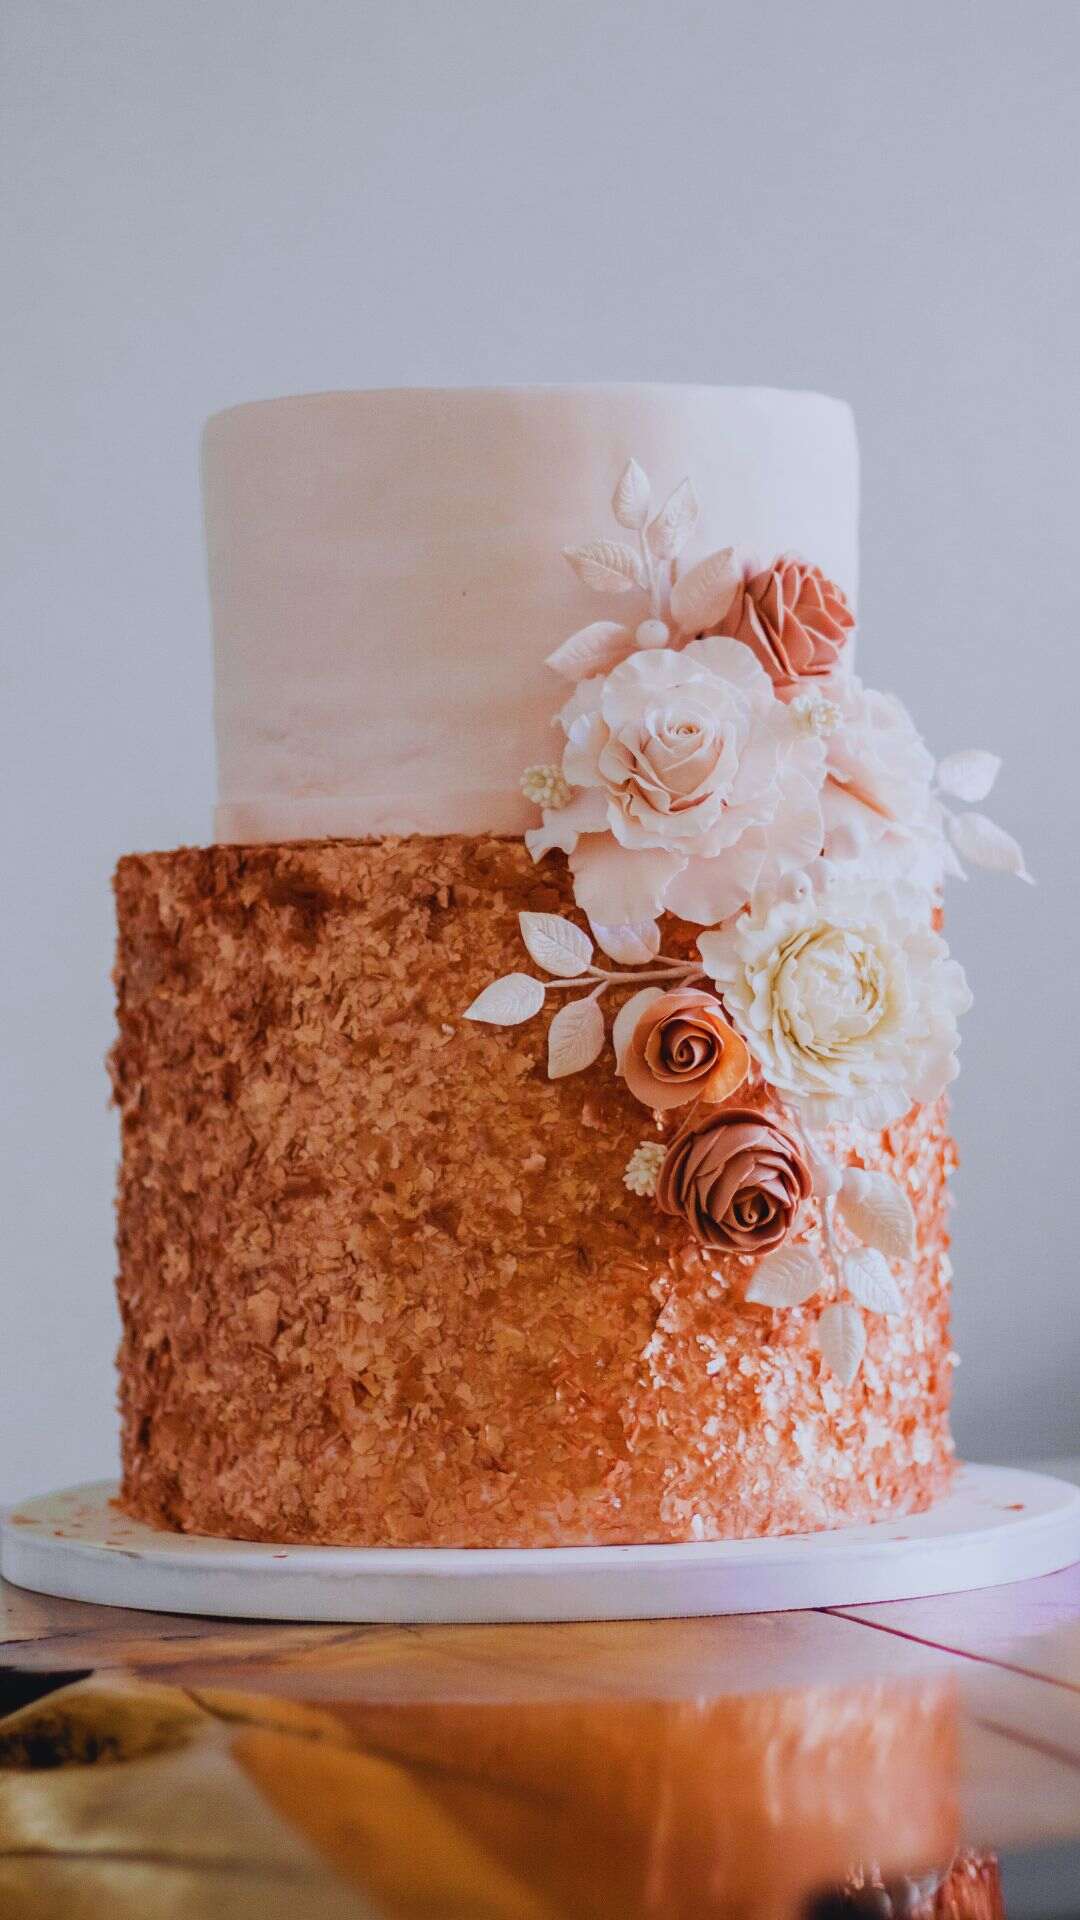 Top cake trends for 2024 revealed | Feature | British Baker